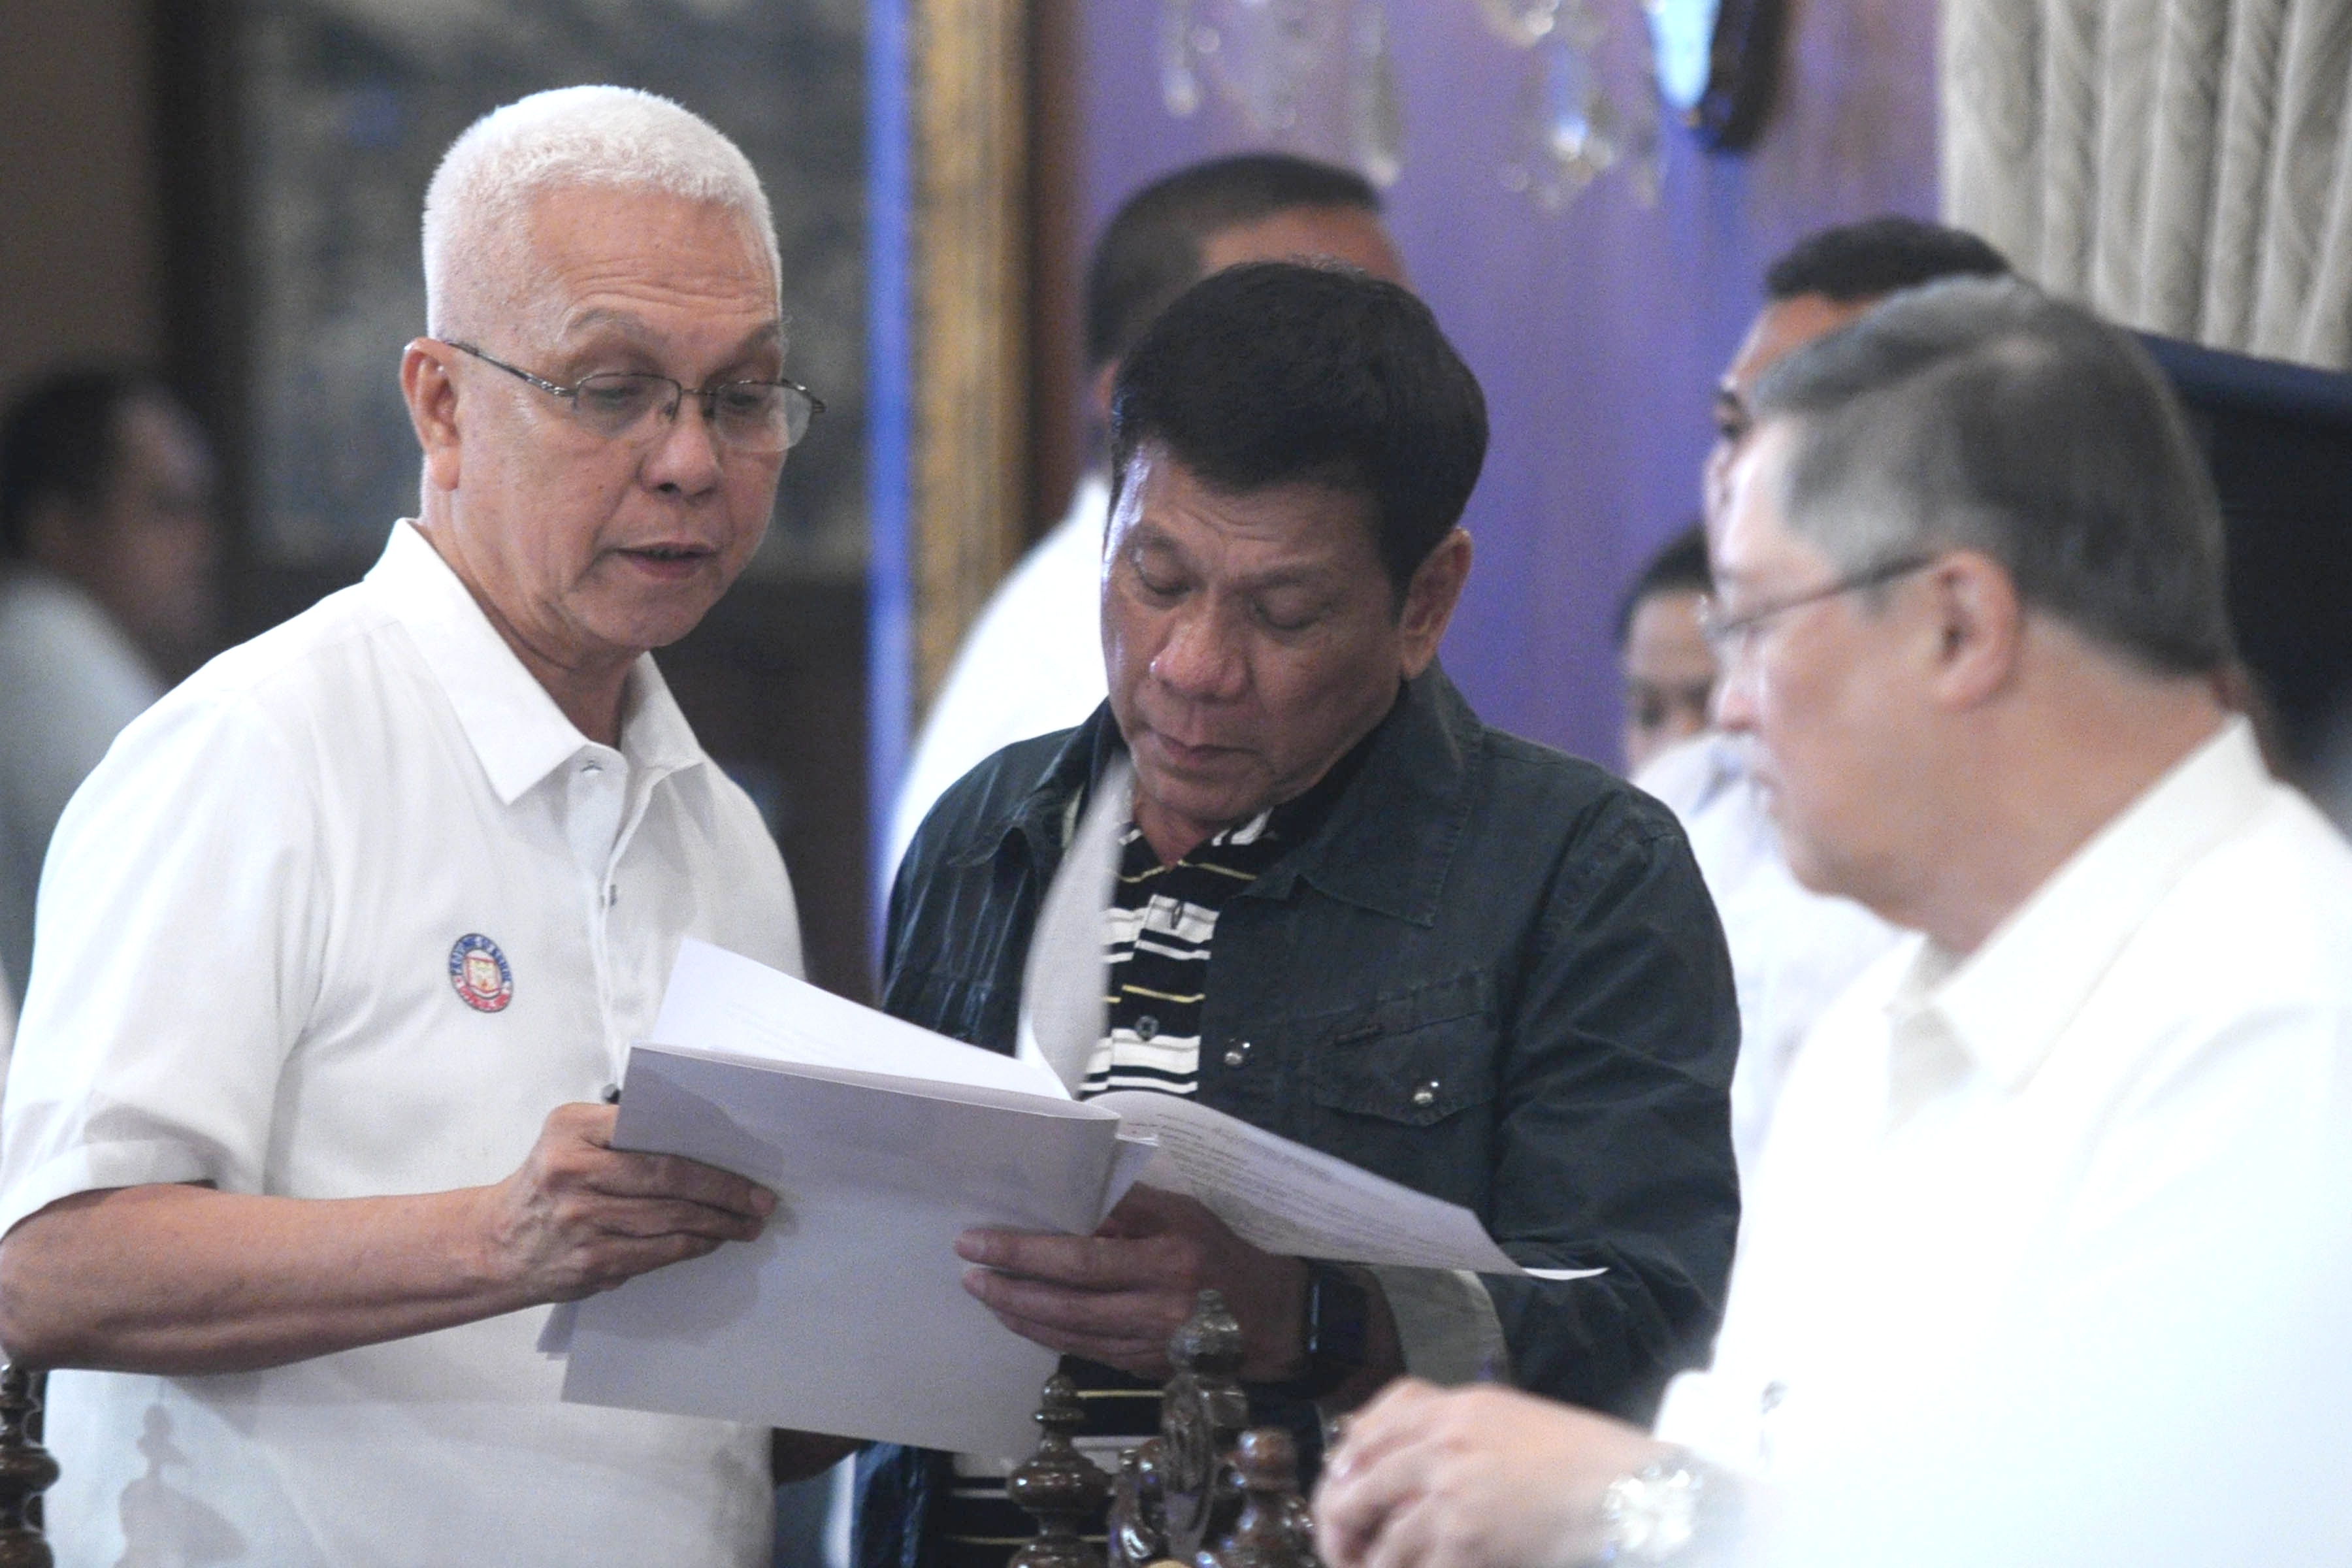 UNDER EVASCO'S OFFICE. Cabinet Secretary Leoncio Evasco Jr (left) is in charge of the 8888 Citizens' Hotline and Complaint Center, to work closely with Special Assistant to the President Christopher Go. Photo by King Rodriguez/Malacañang PPD  